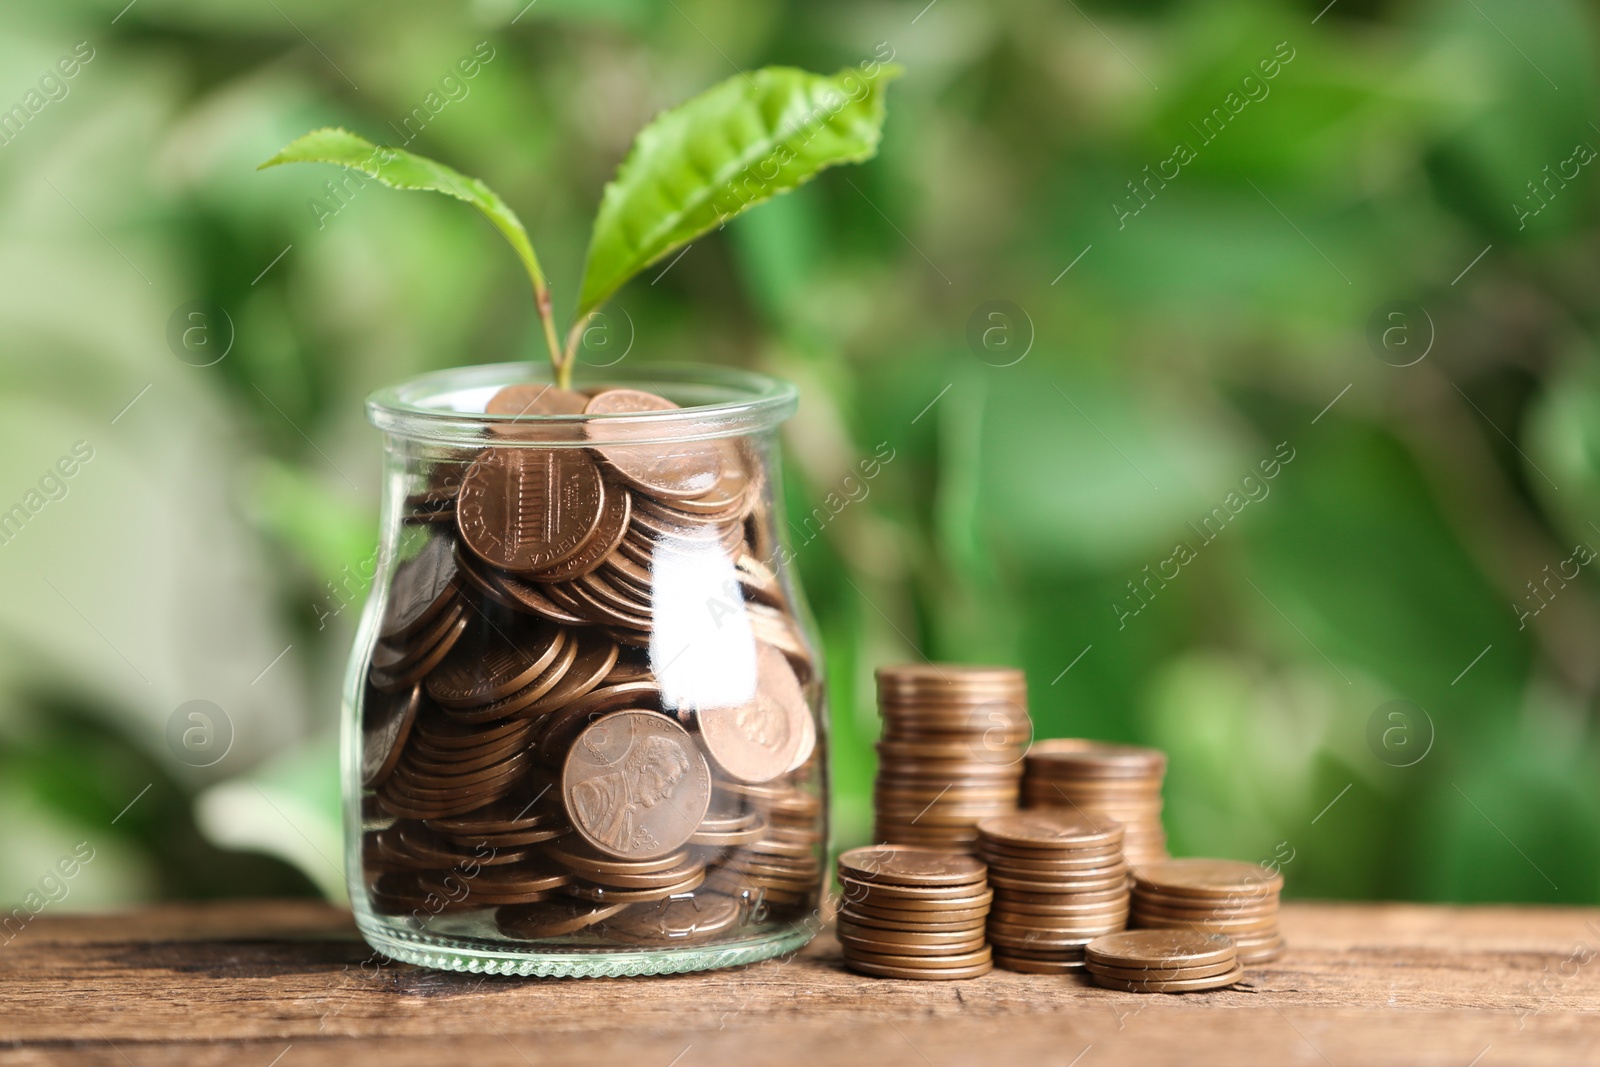 Photo of Money and sprout on wooden table against green blurred background